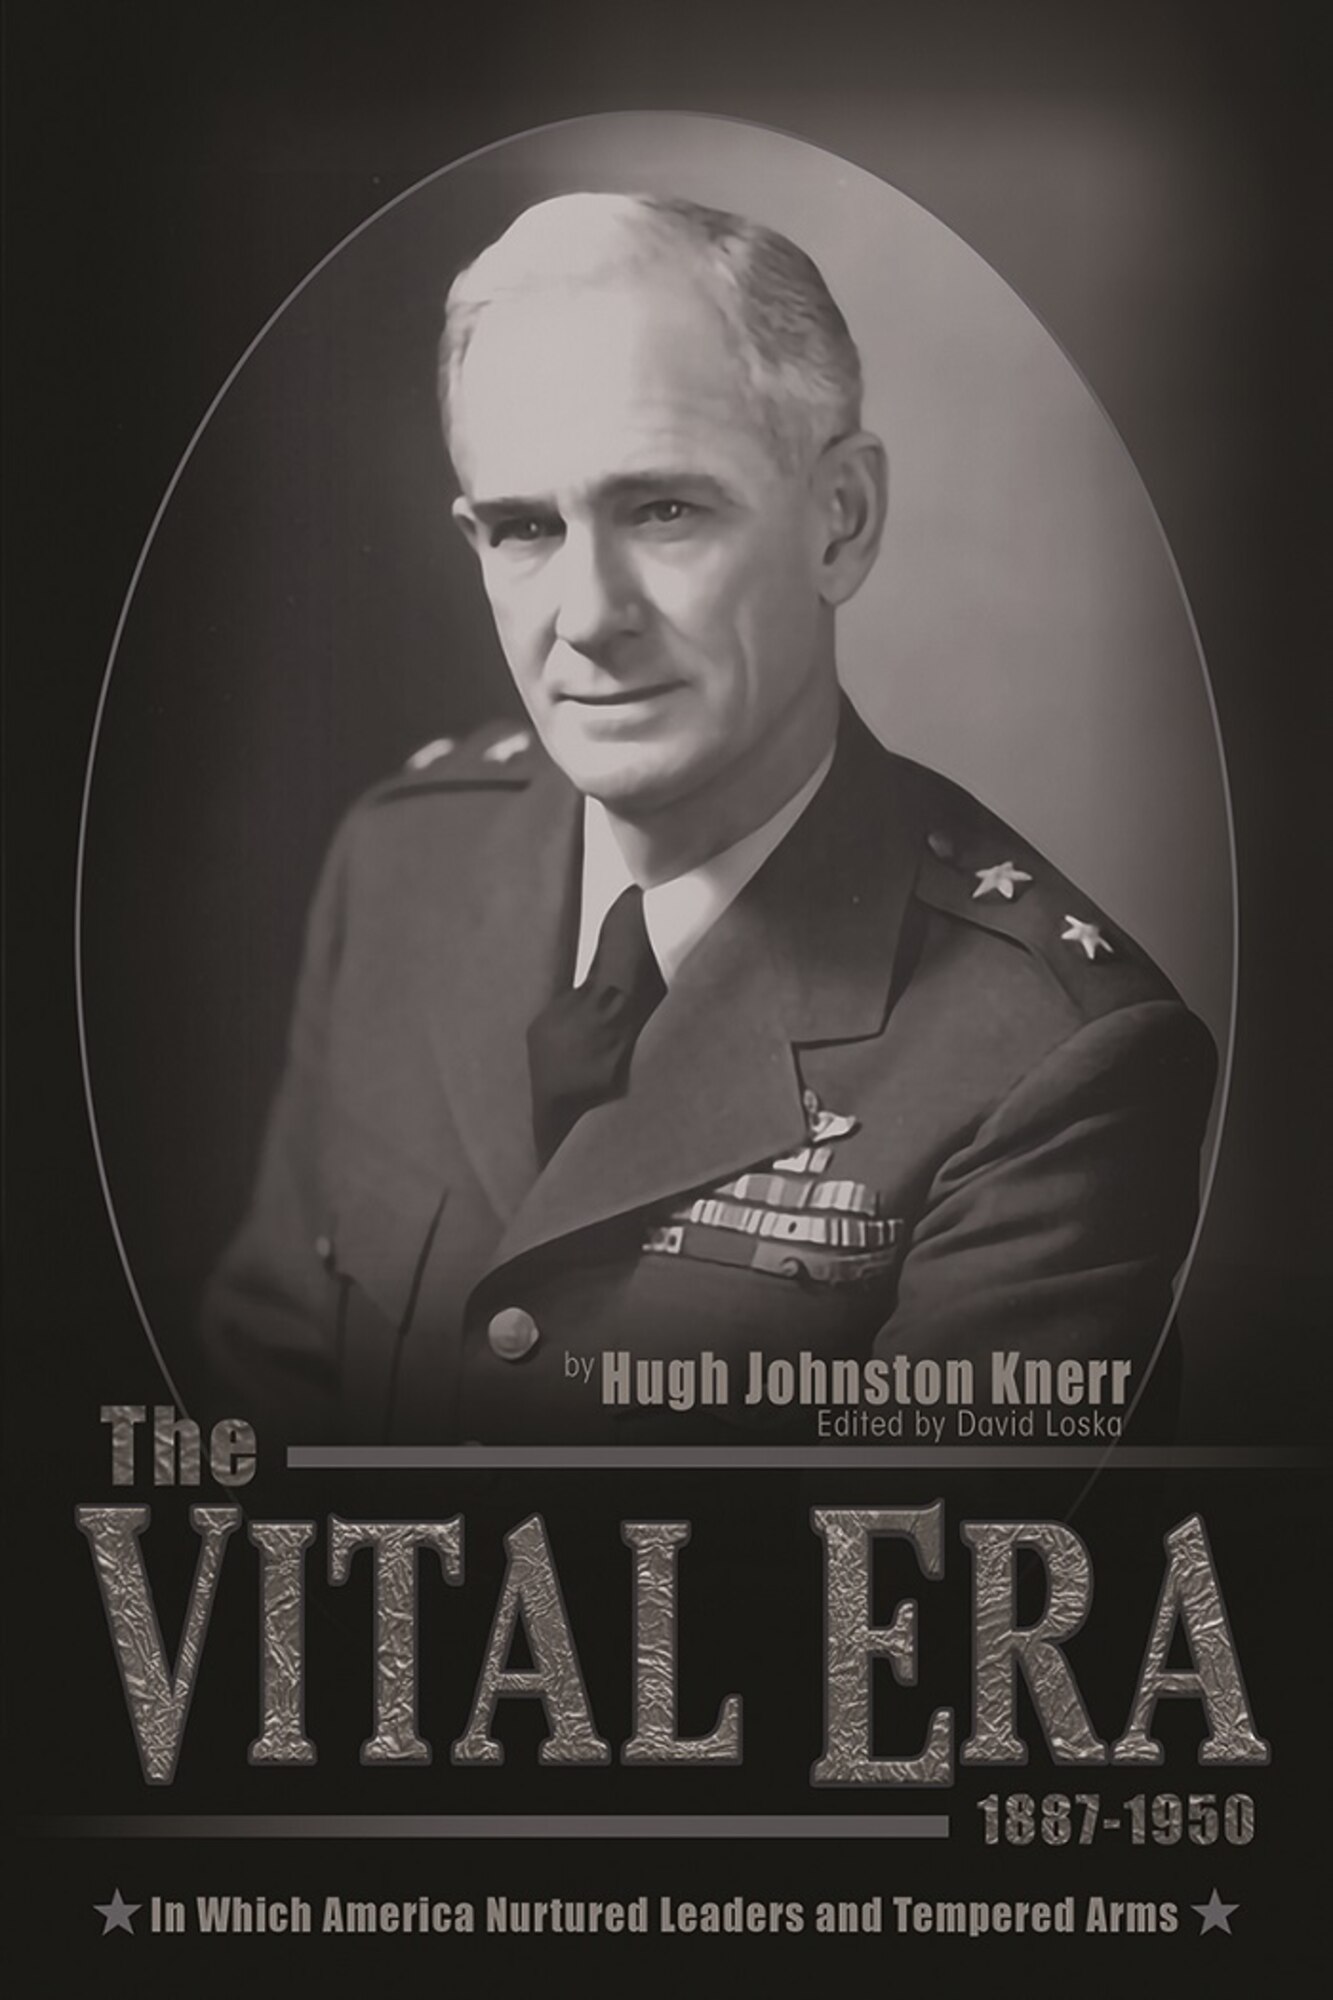 The Vital Era in Which America Nurtured Leaders and Tempered Arms, 1887–1950, is a memoir by Maj. Gen. Hugh J. Knerr and edited by Capt. David A. Loska.